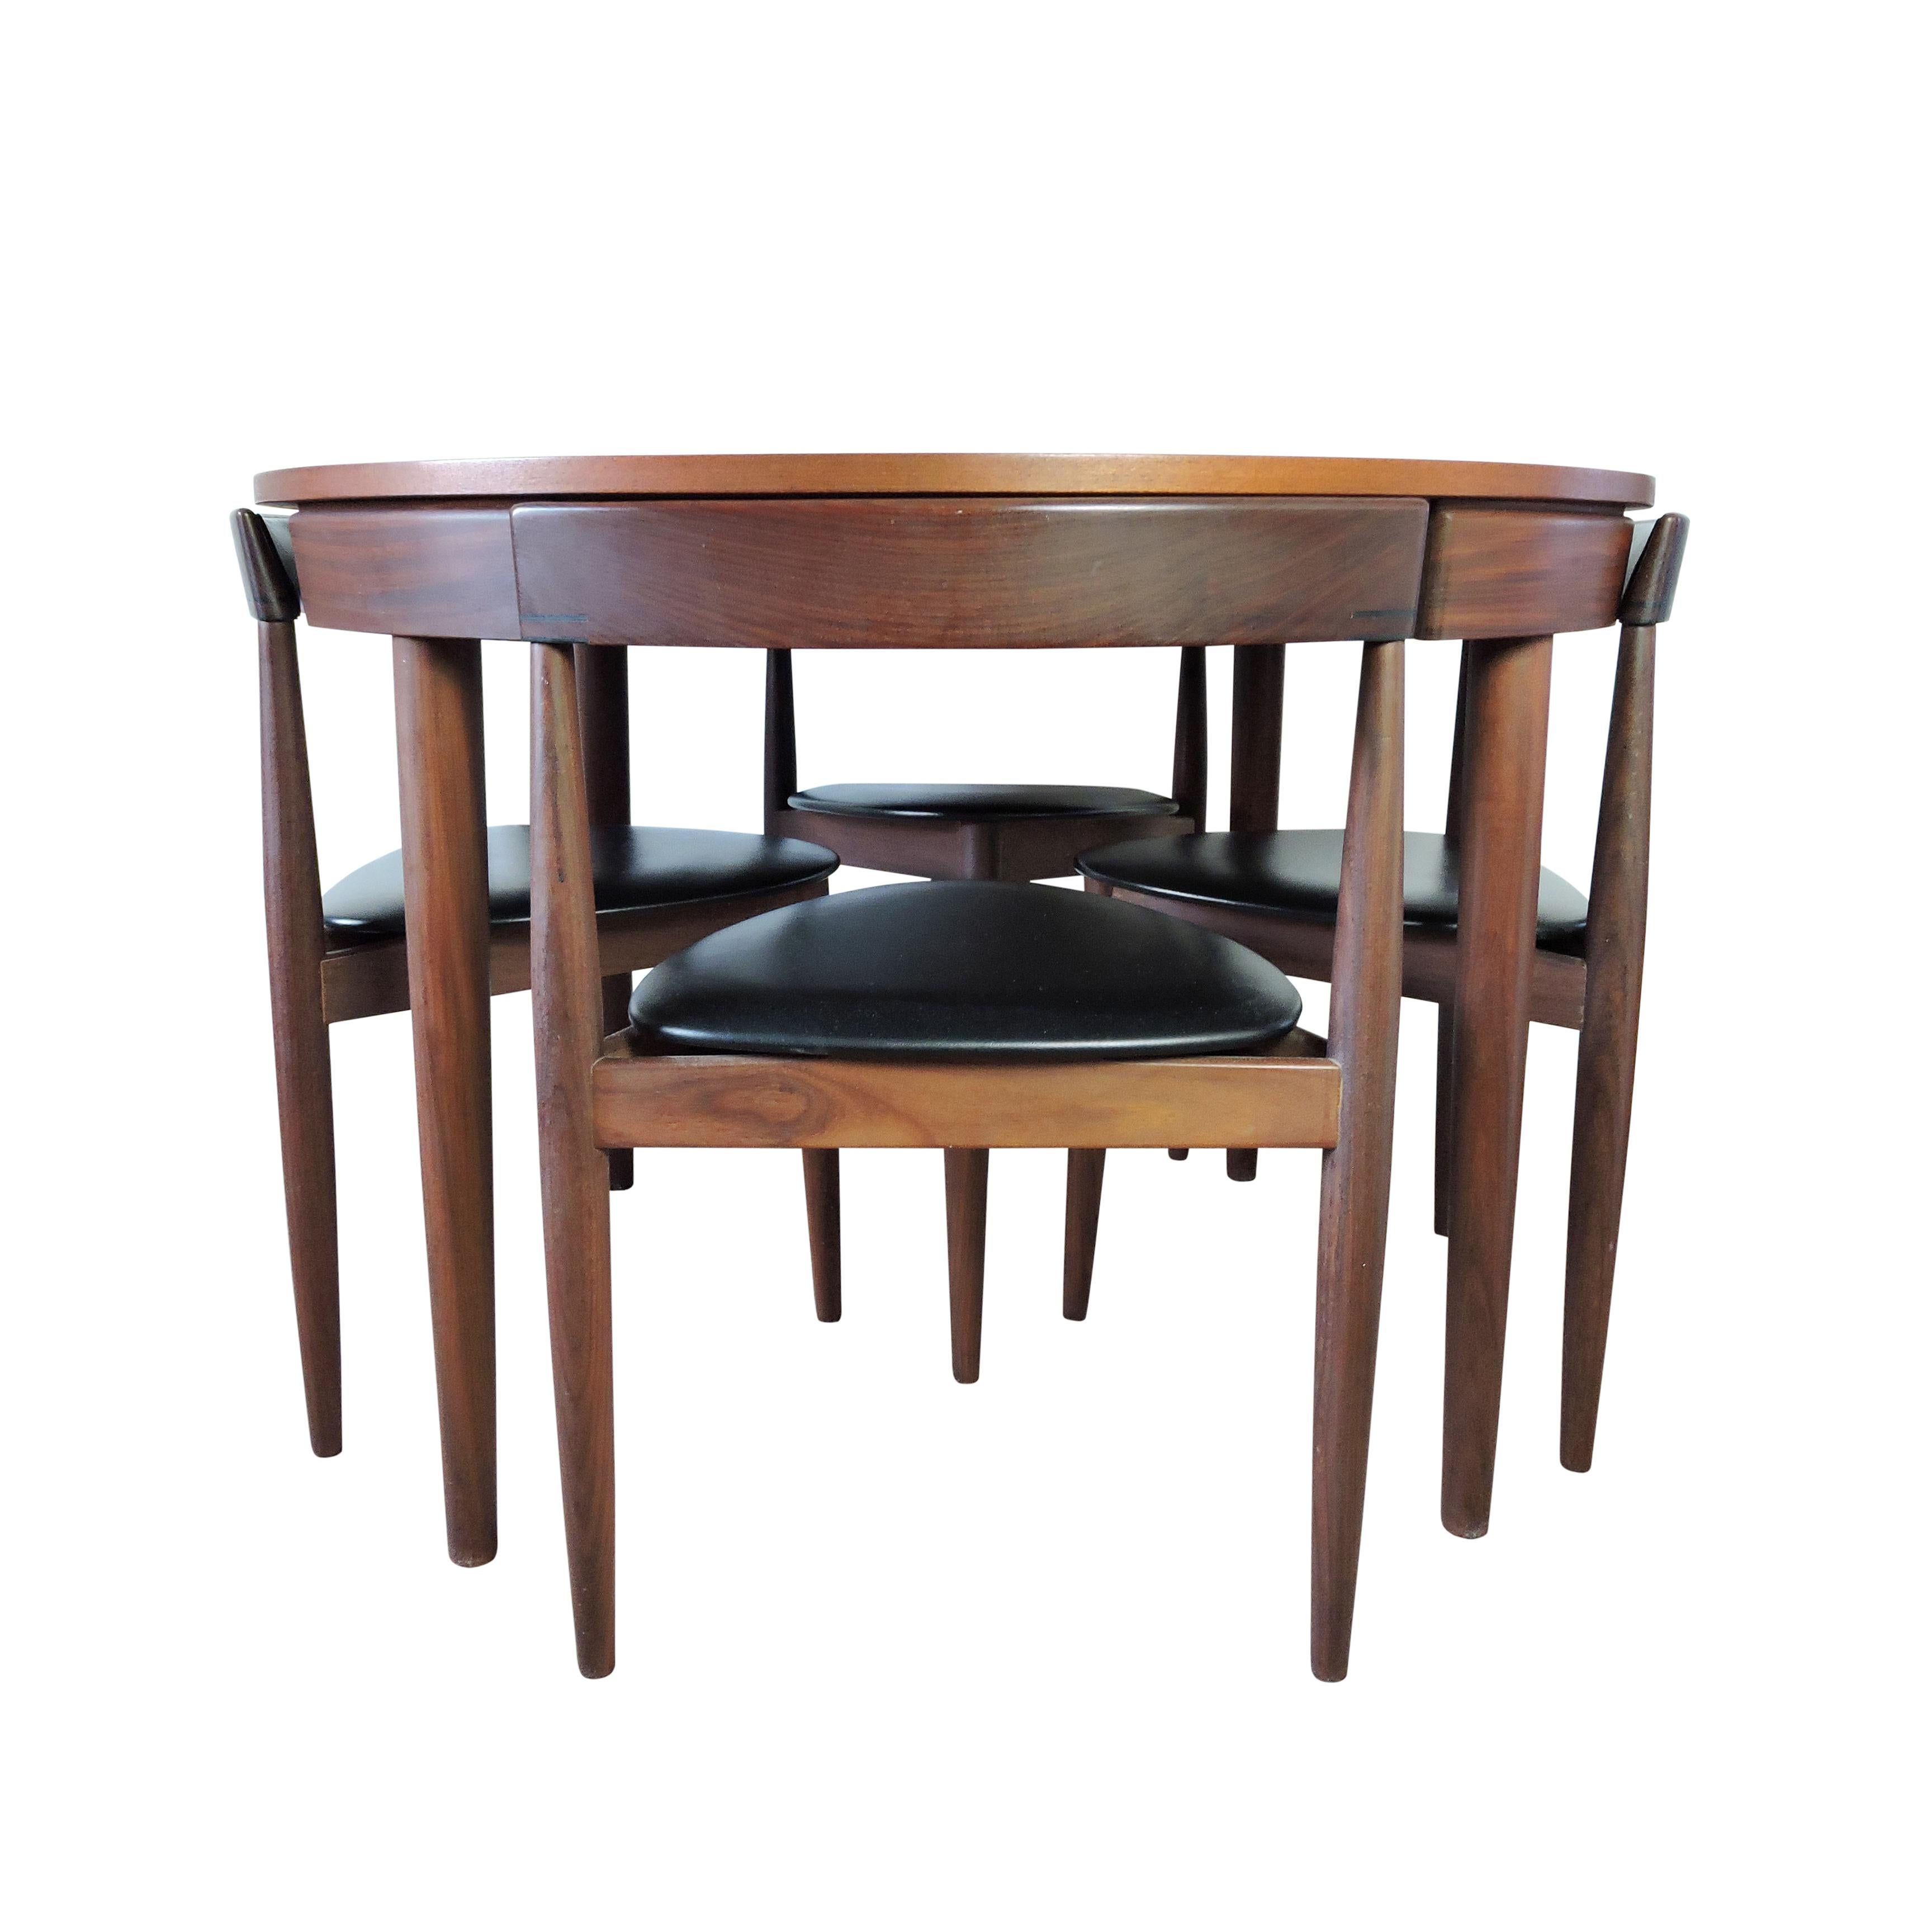 A 1960s teak and Aformosia dining table with four chairs. Manufactured by Frem Rojle in Denmark and designed by Hans Olsen.
The table extends to 156.5cm.